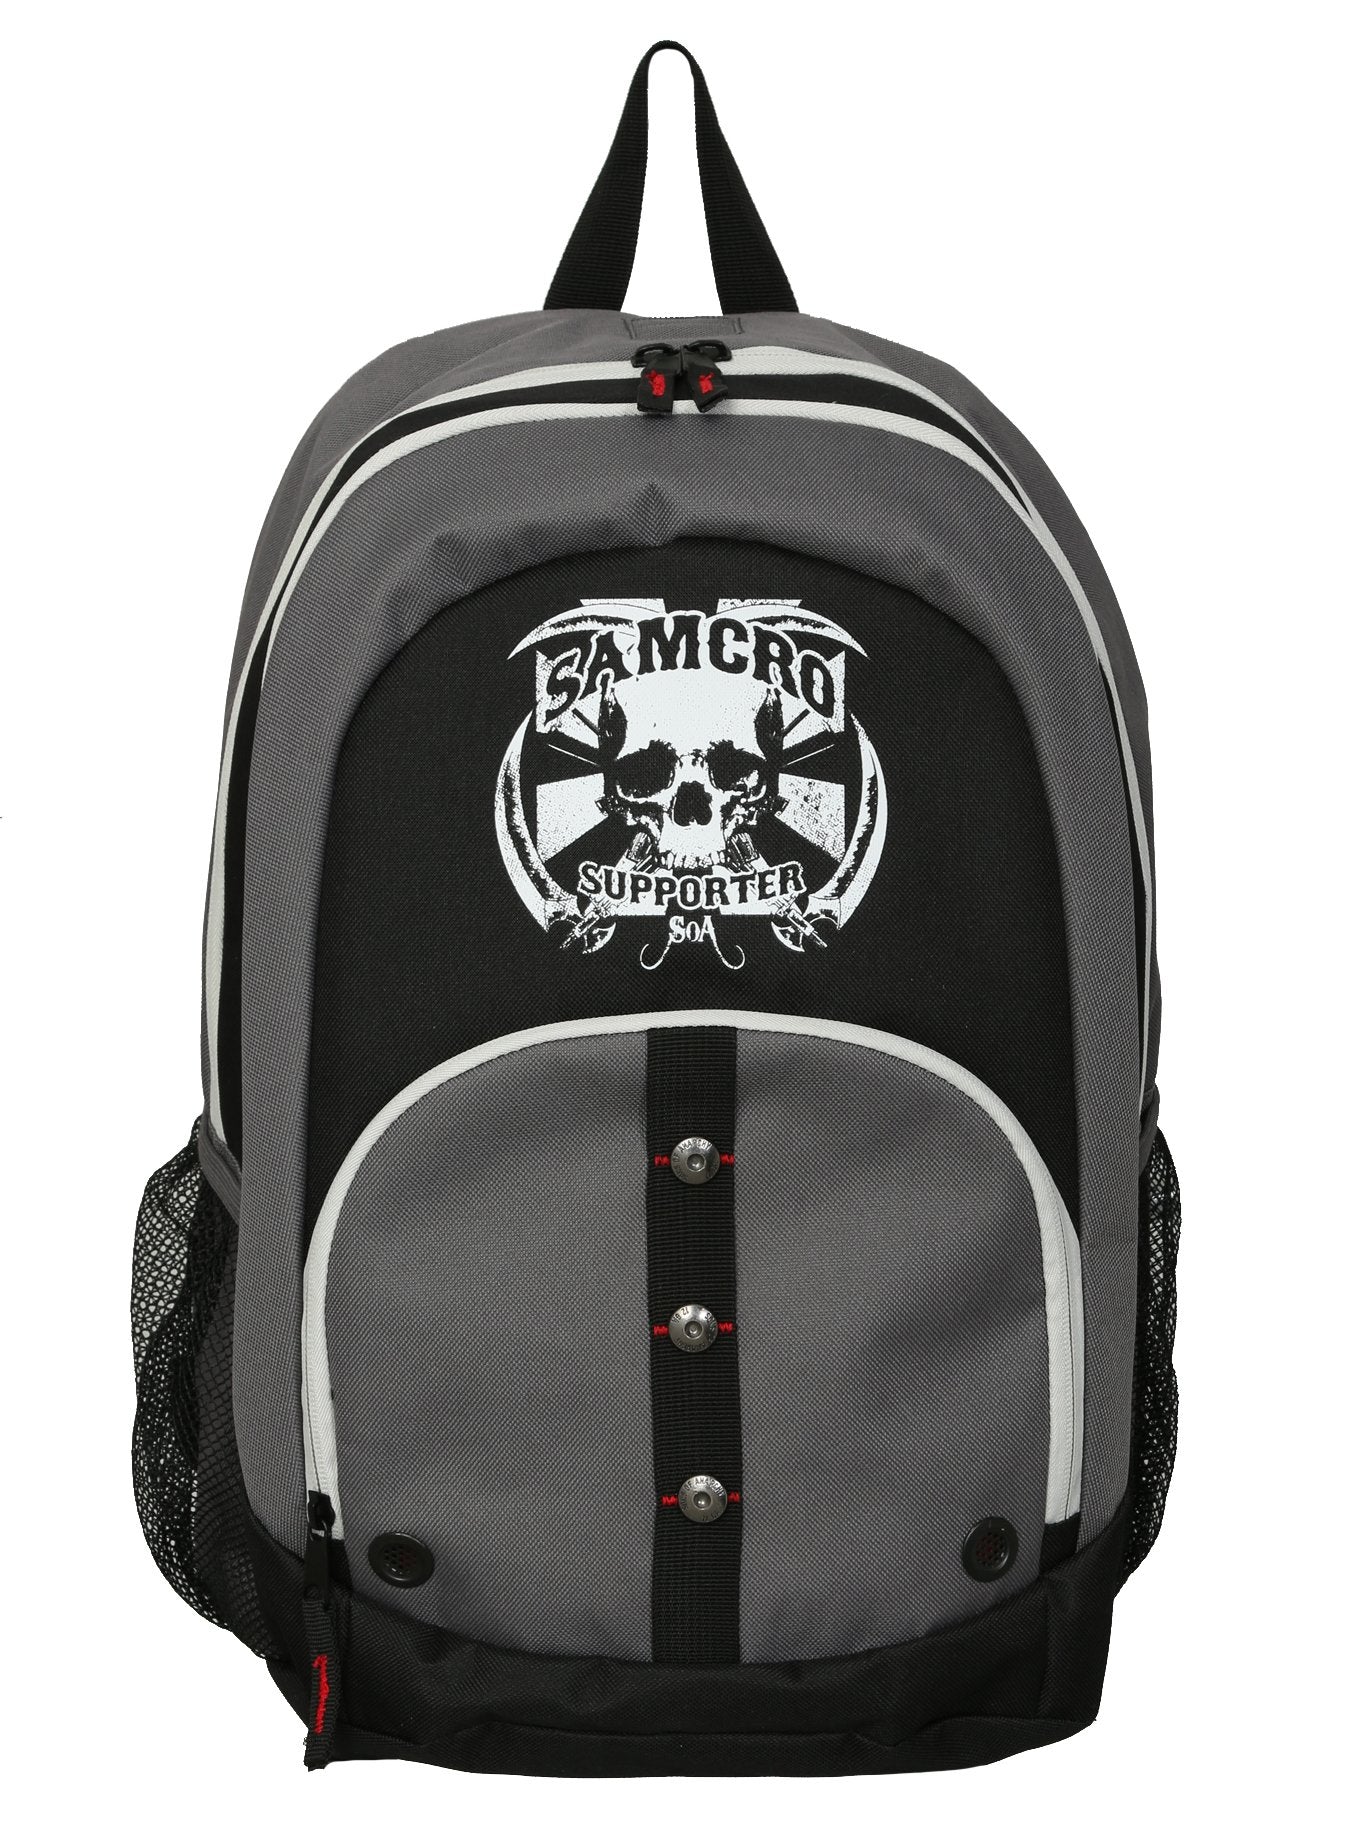 Sons of Anarchy Men's Soa Supporter Backpack, Black, One Size